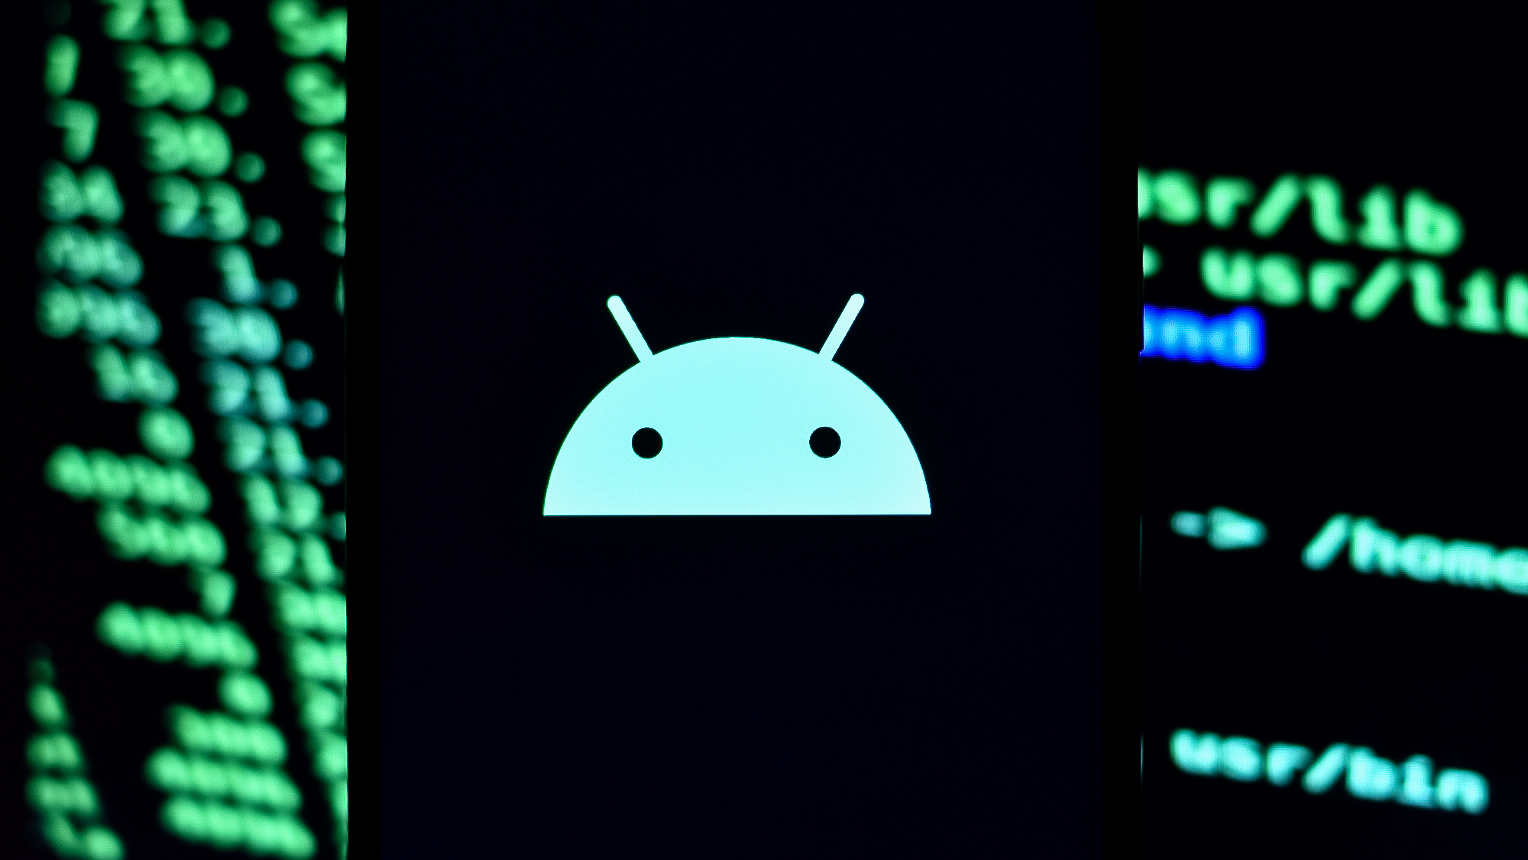 Android malware code